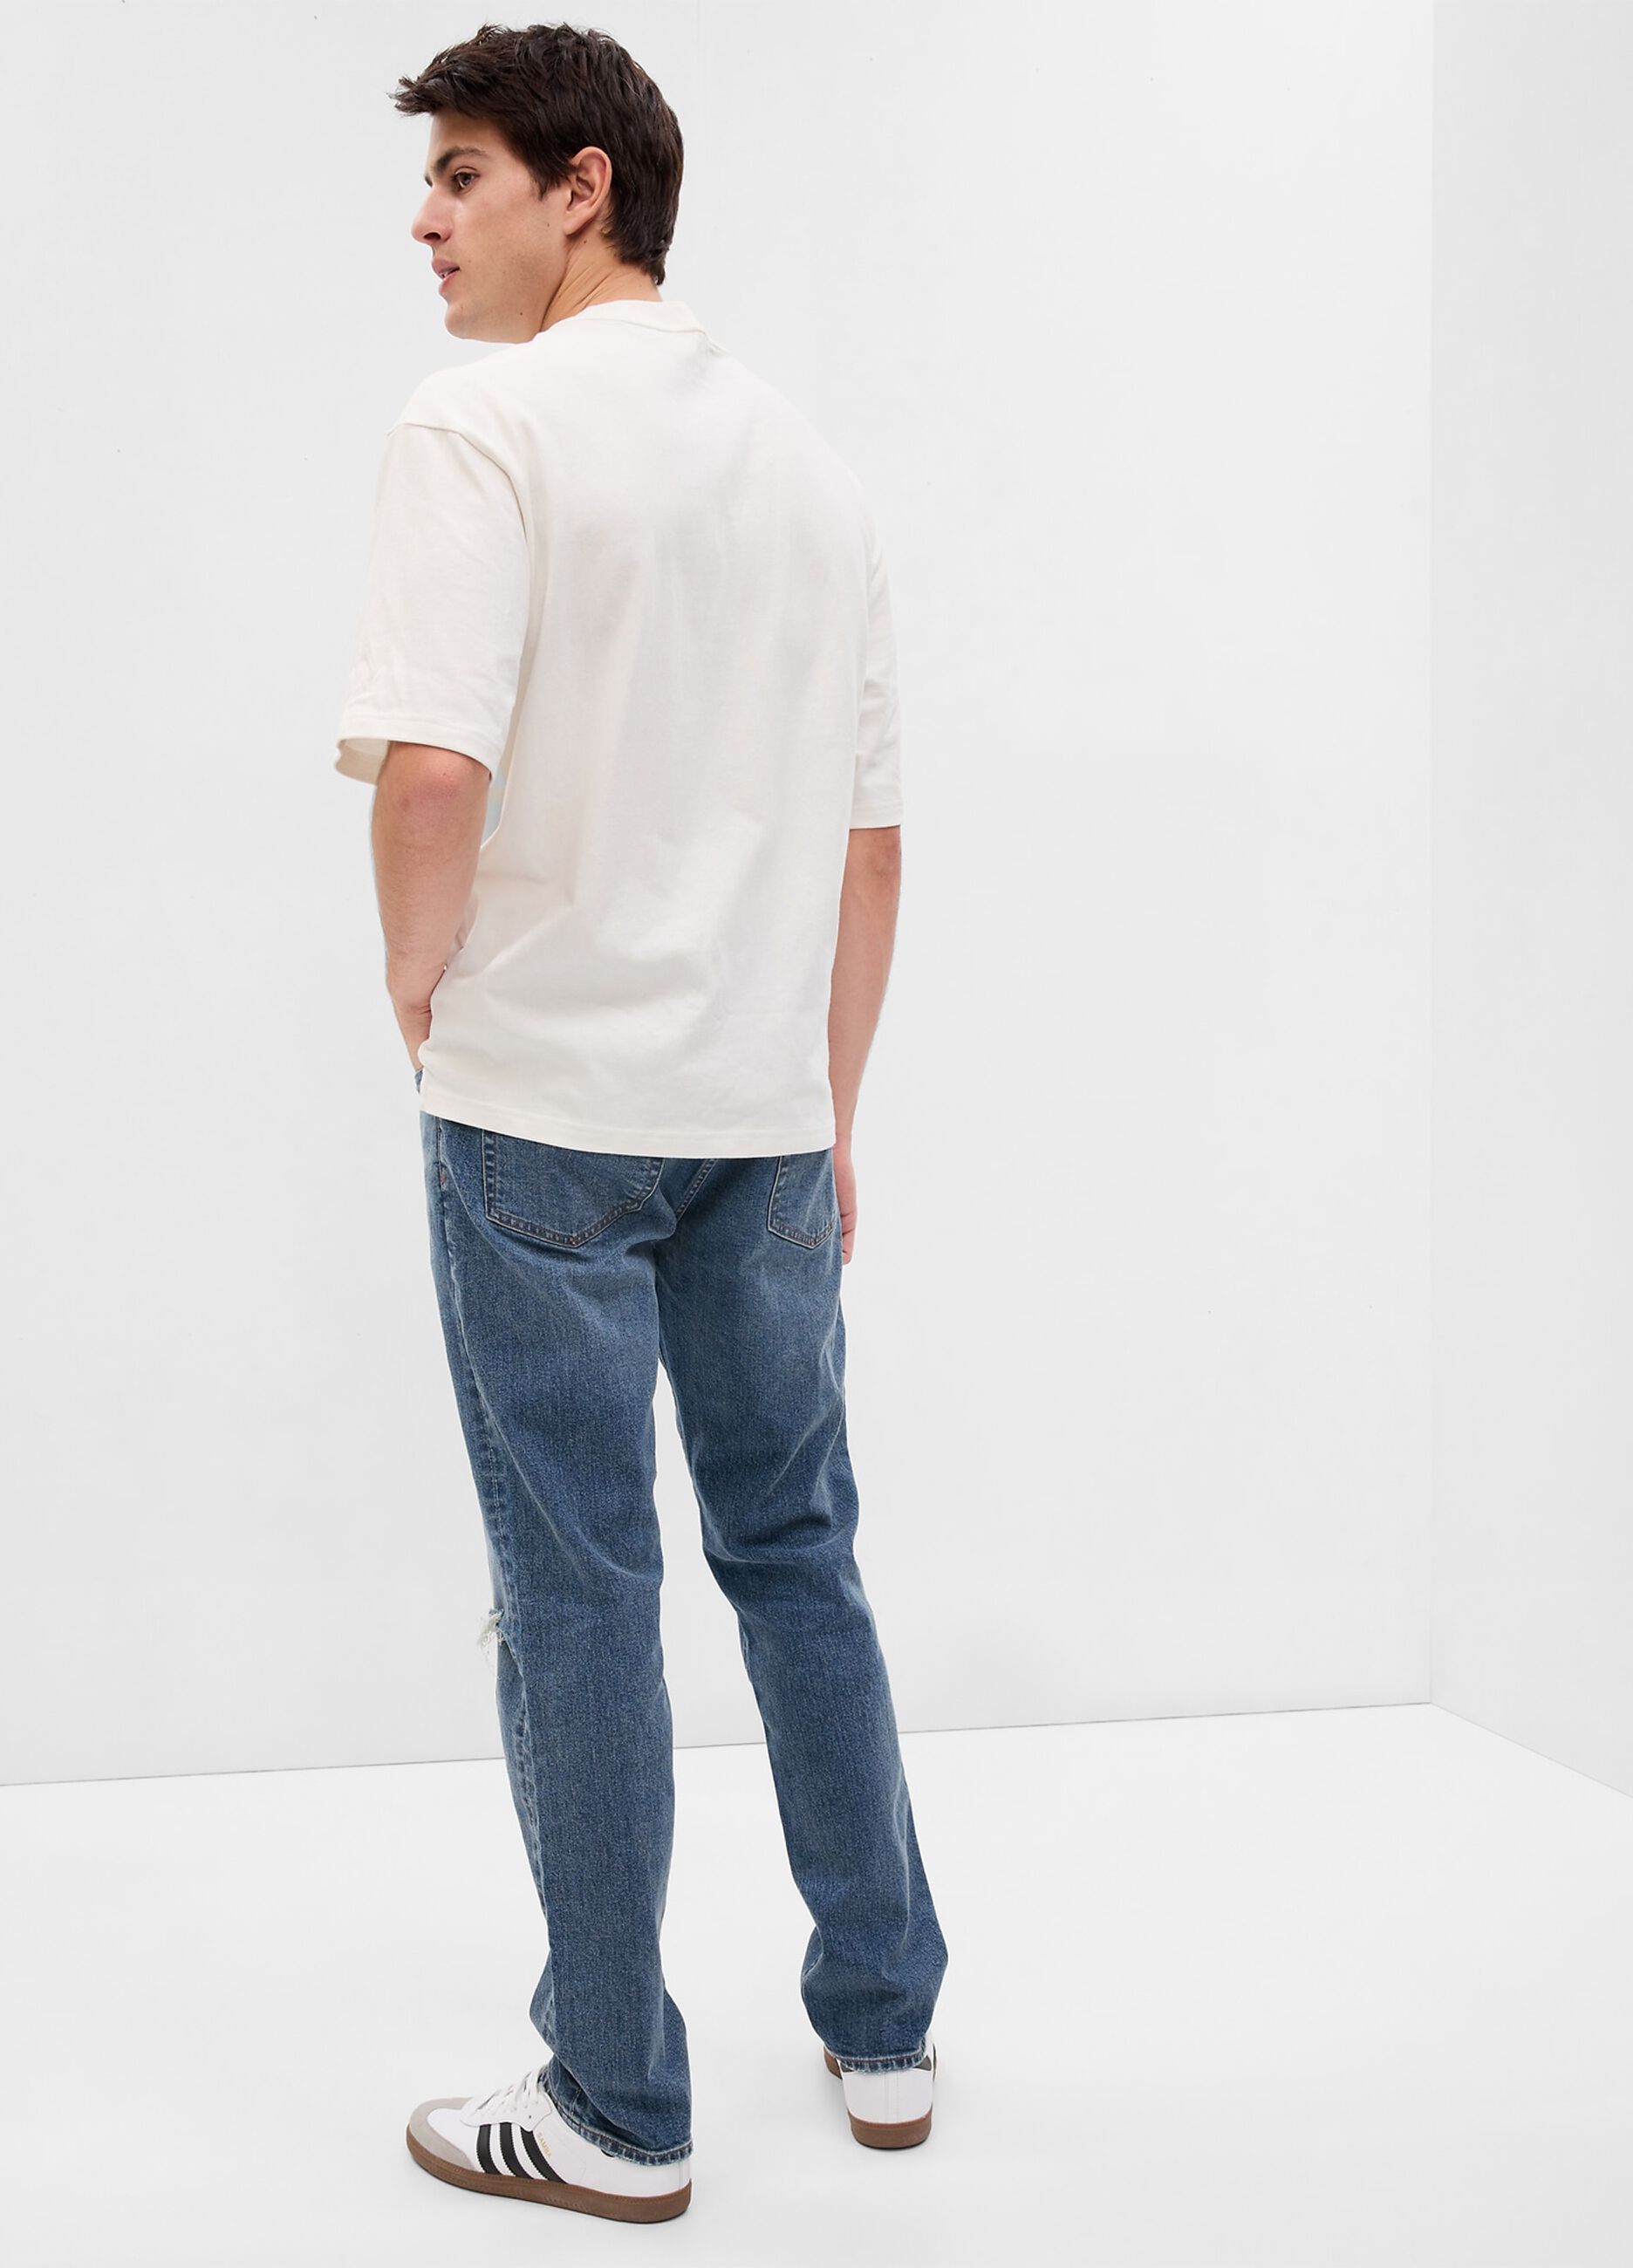 Slim fit jeans with worn look